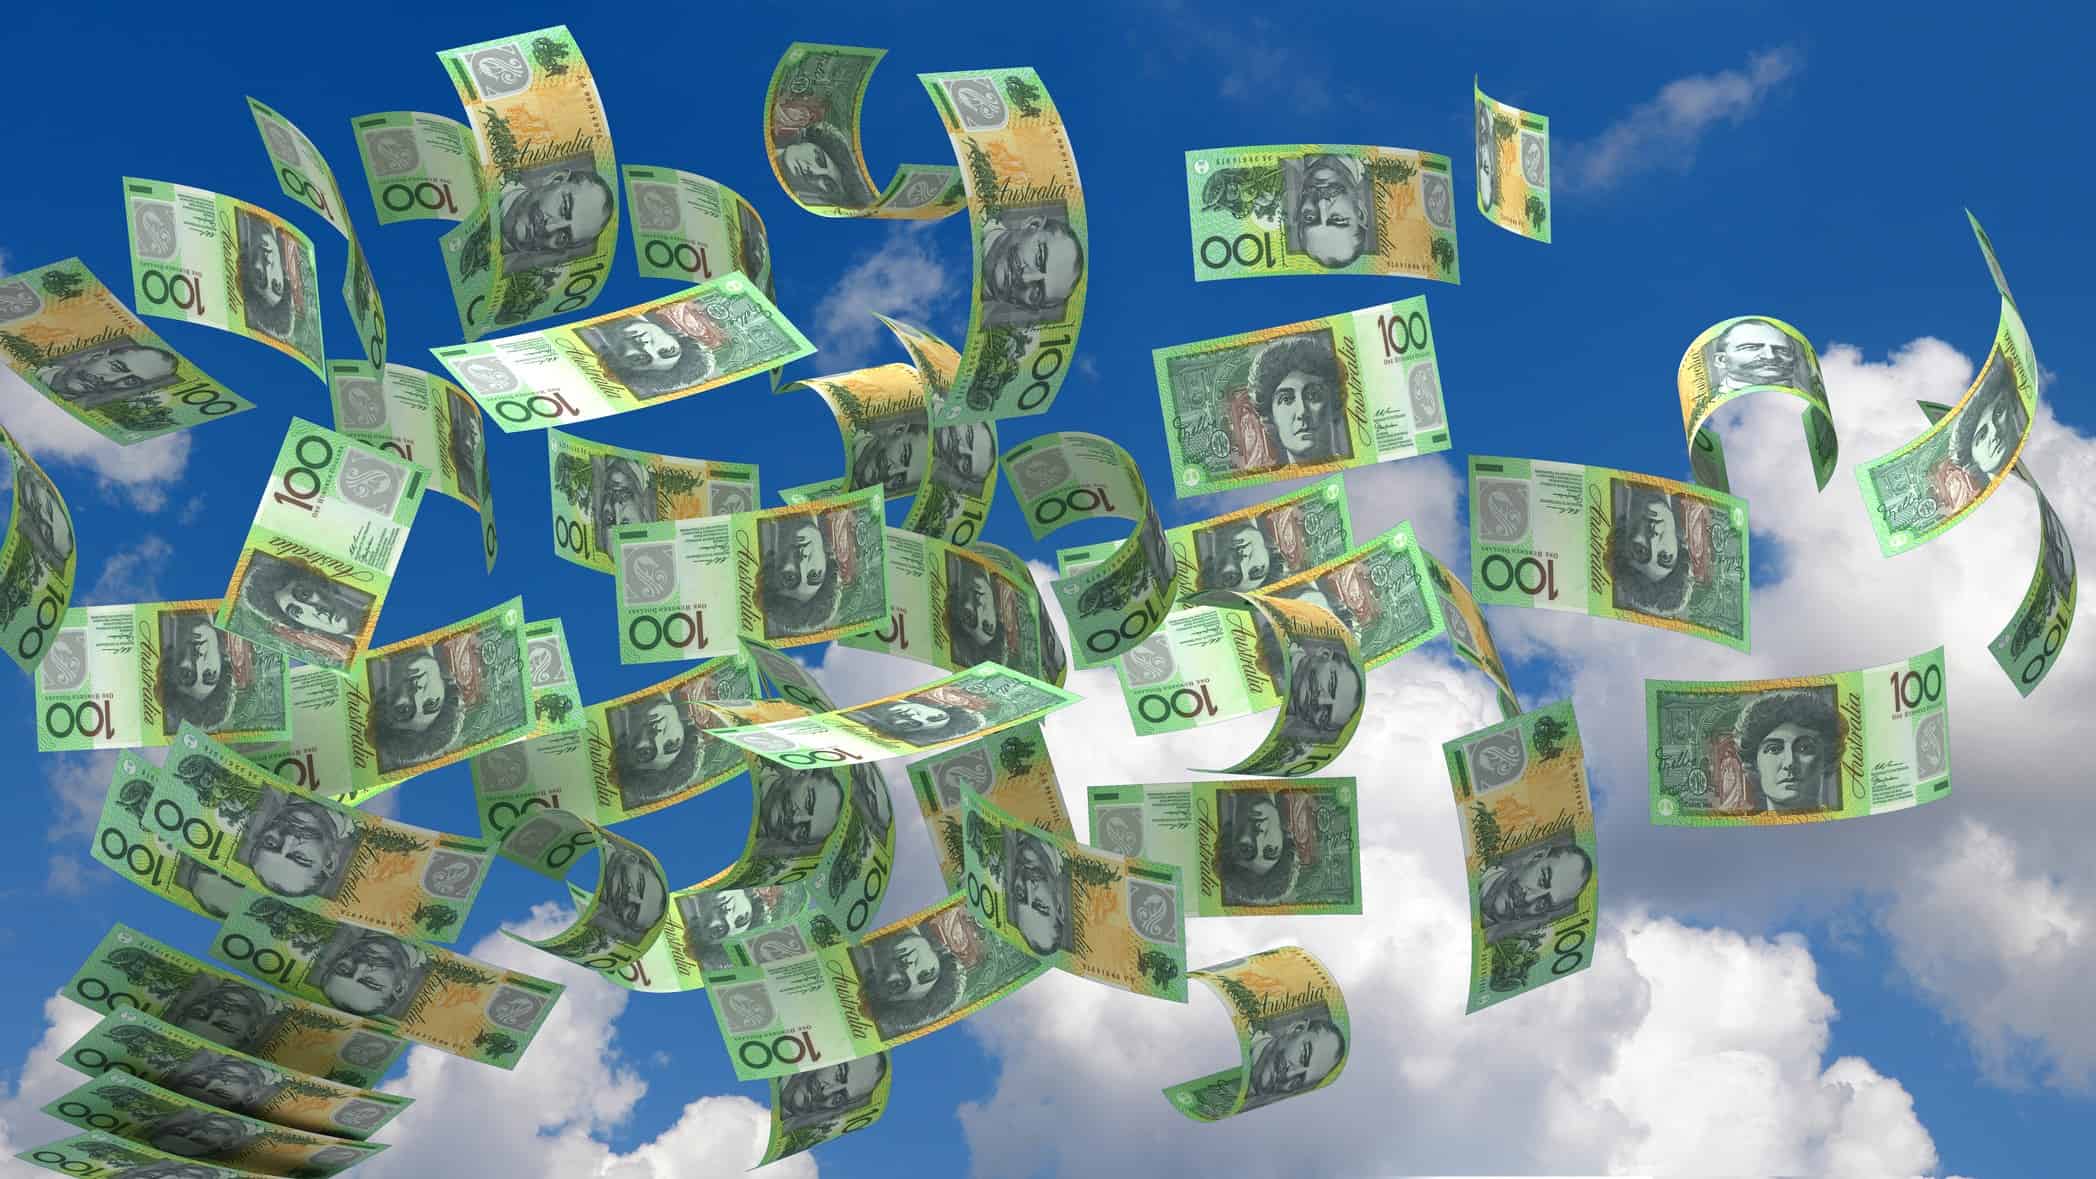 one hundred dollar notes blowing in the wind representing dividend windfall